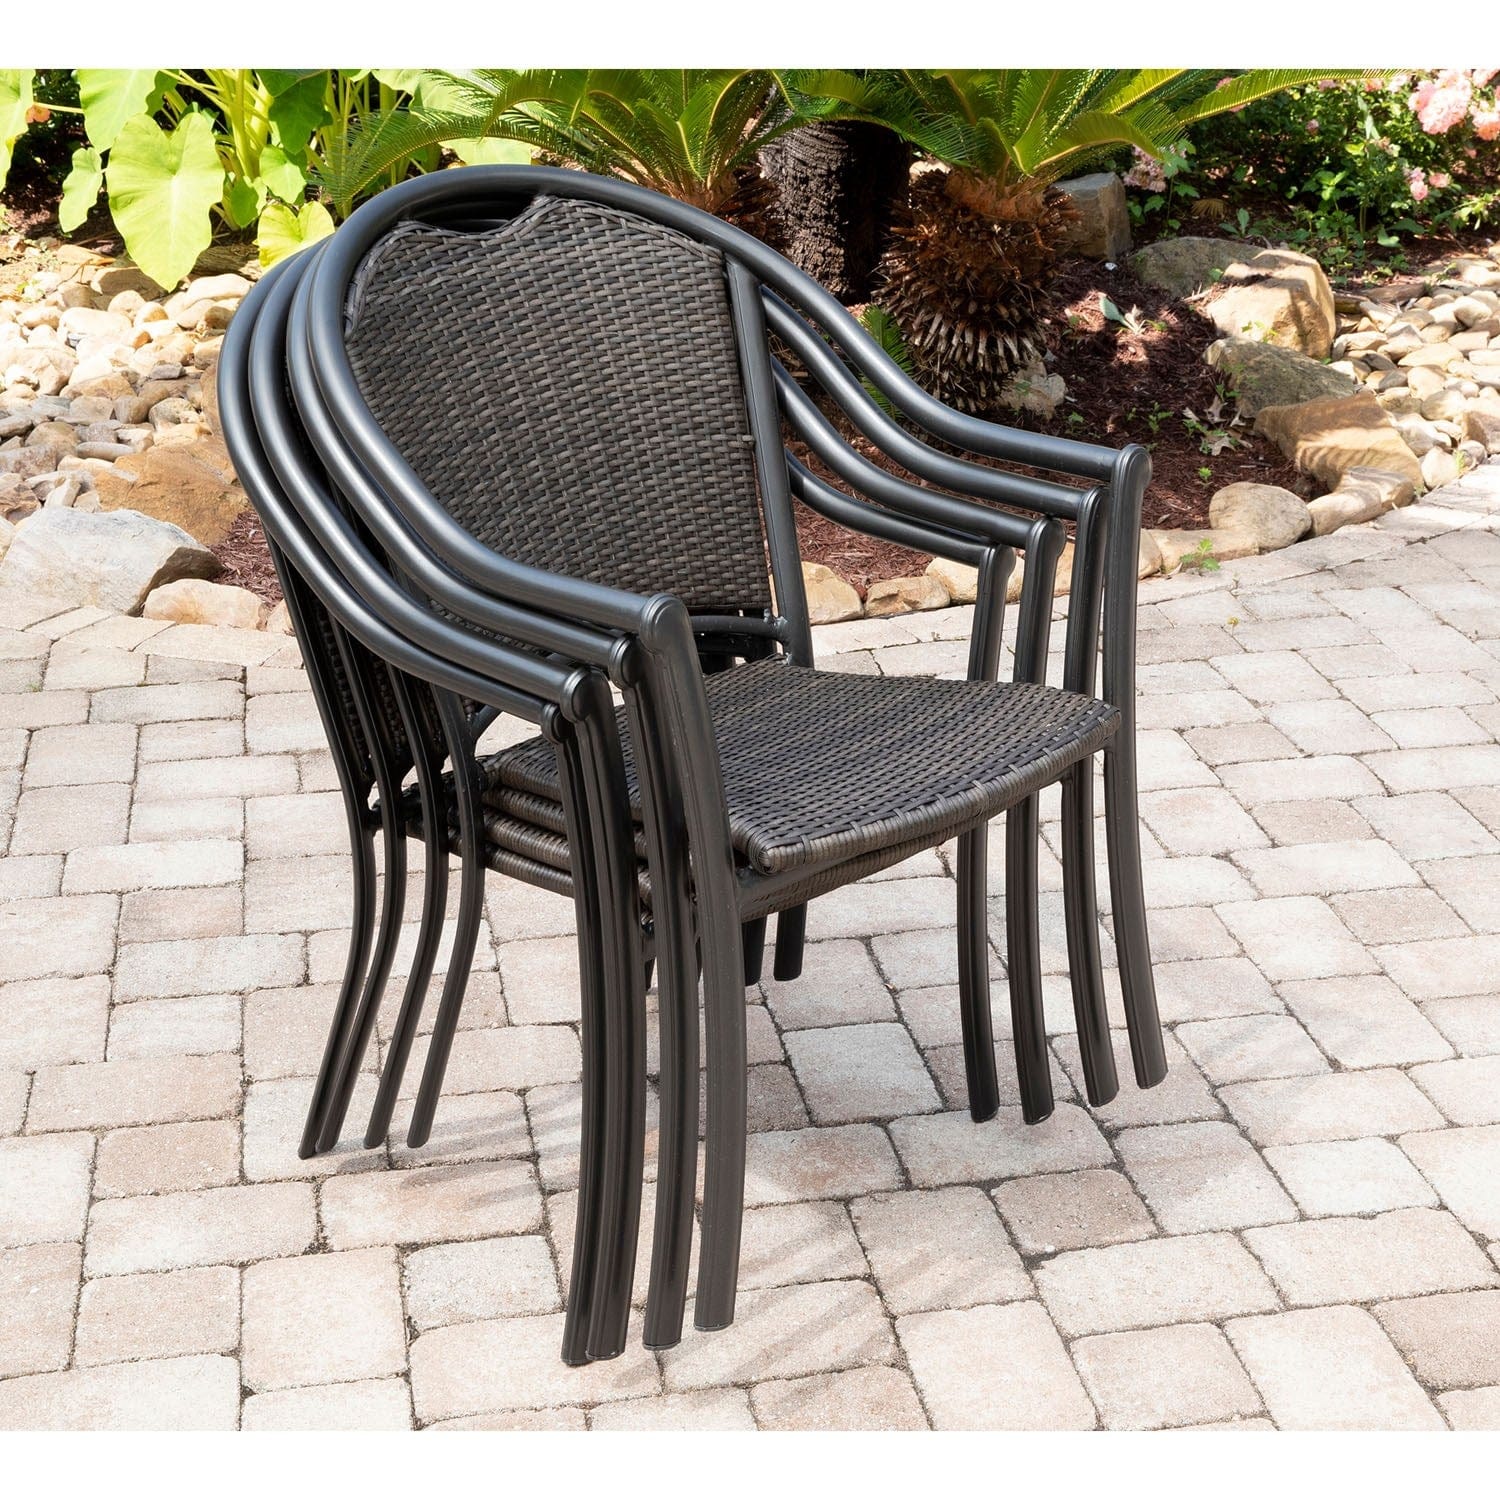 Hanover Bistro Set Hanover - Bambray 3 Piece Dining Set | 2 Woven Dining Chairs | 1 30" Sq Glass Table | Brown | BAMDN3PCG